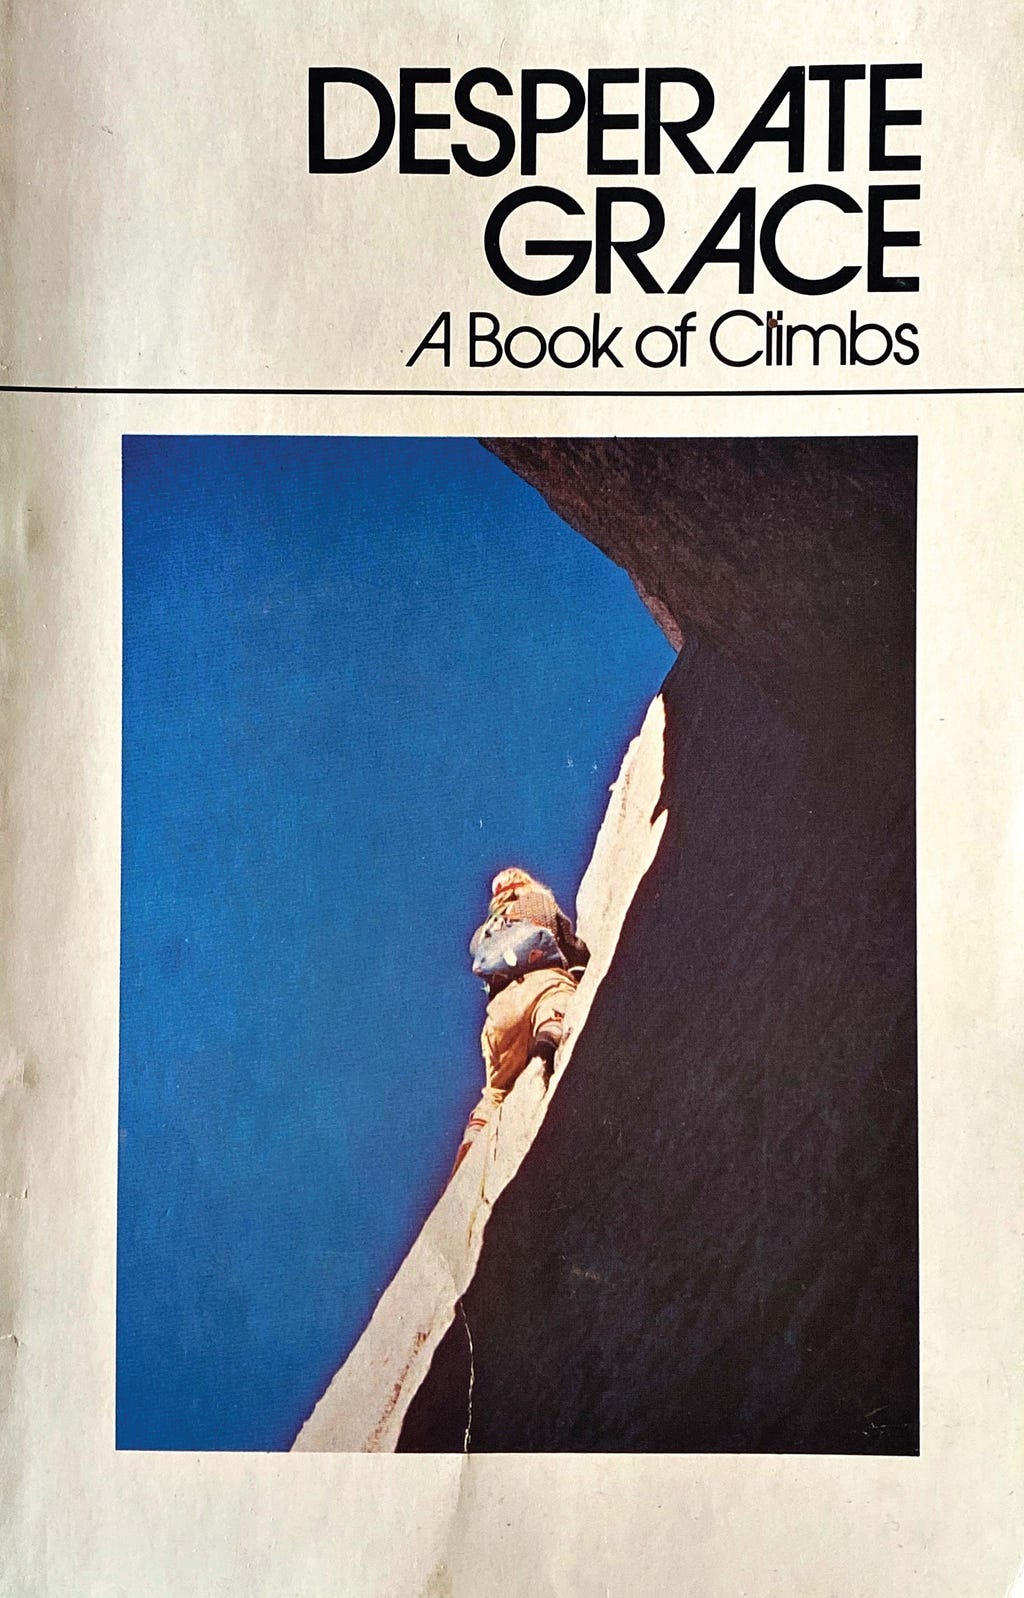 A photograph of the cover of an older book, with the title “DESPERATE GRACE: A BOOK OF CLIMBS” visible above a photograph of a person climbing up a rock wall.